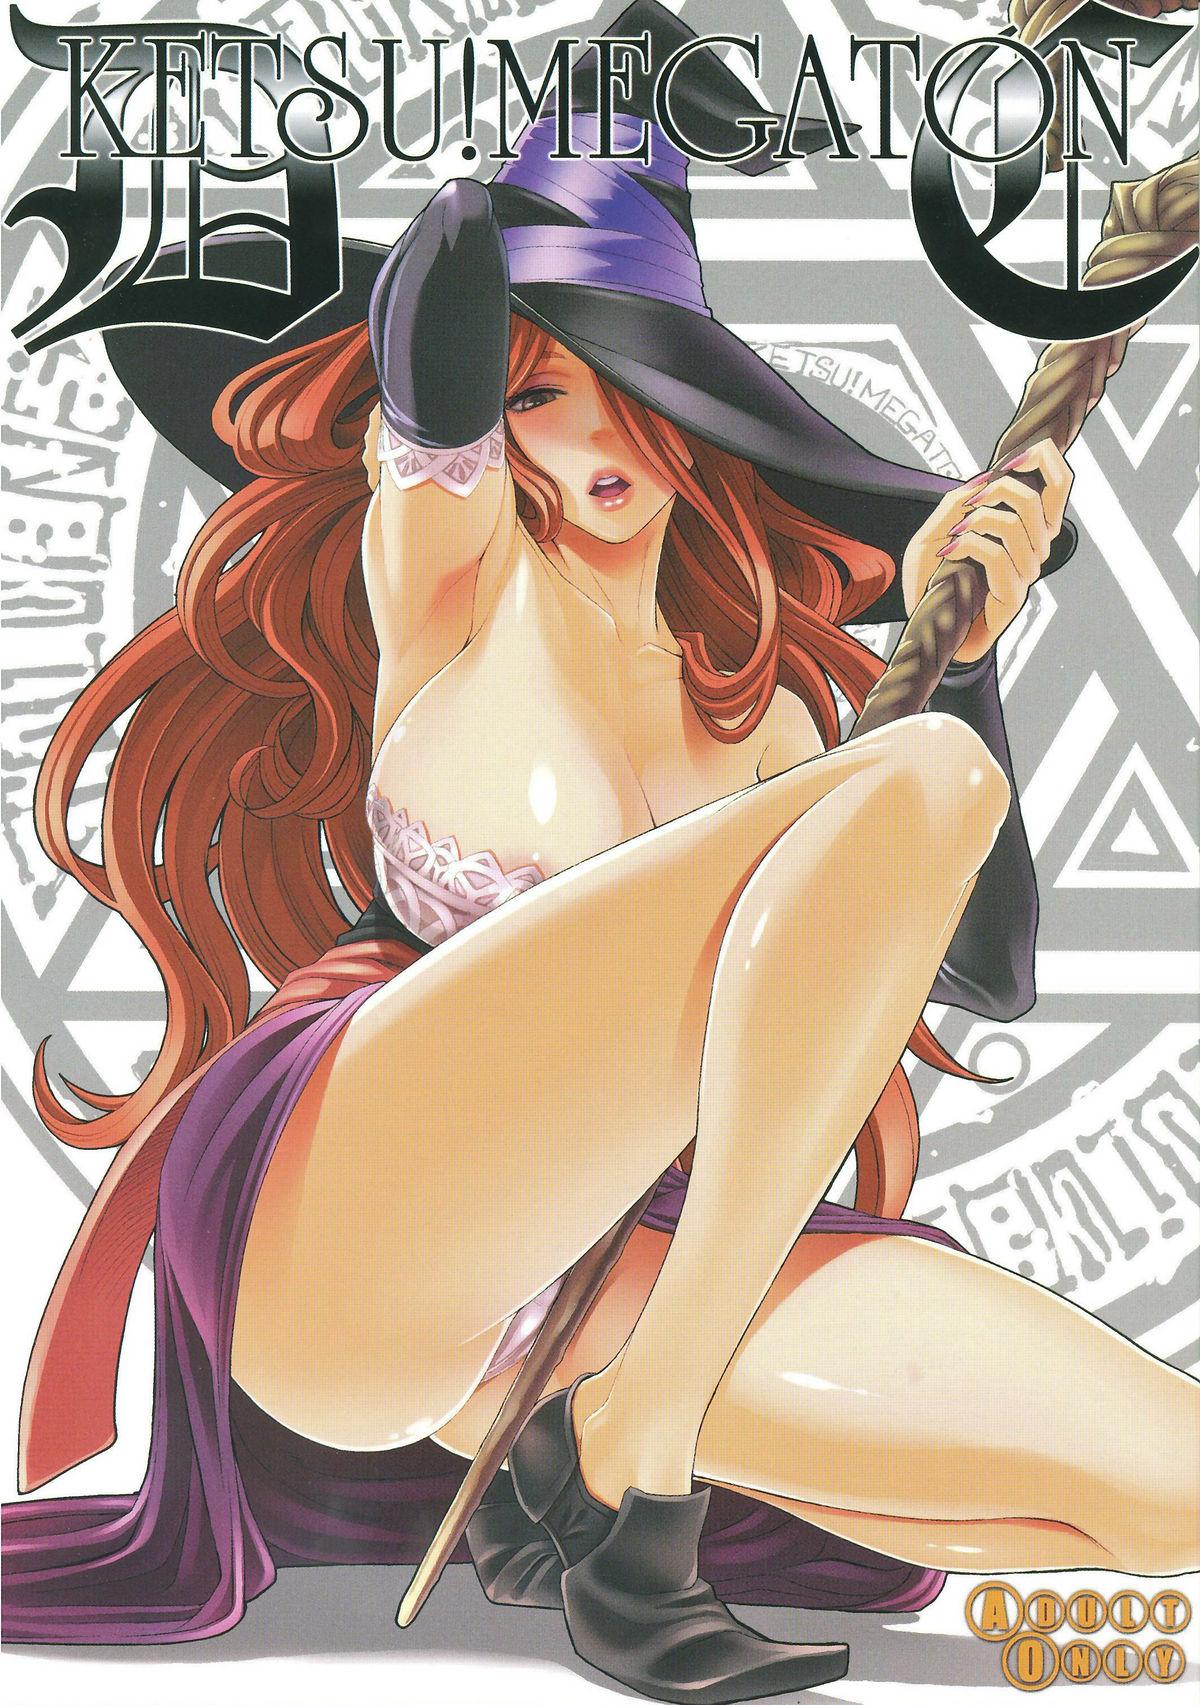 Brunet Ketsu! Megaton DC - Dragons crown Ass Fucked - Picture 1